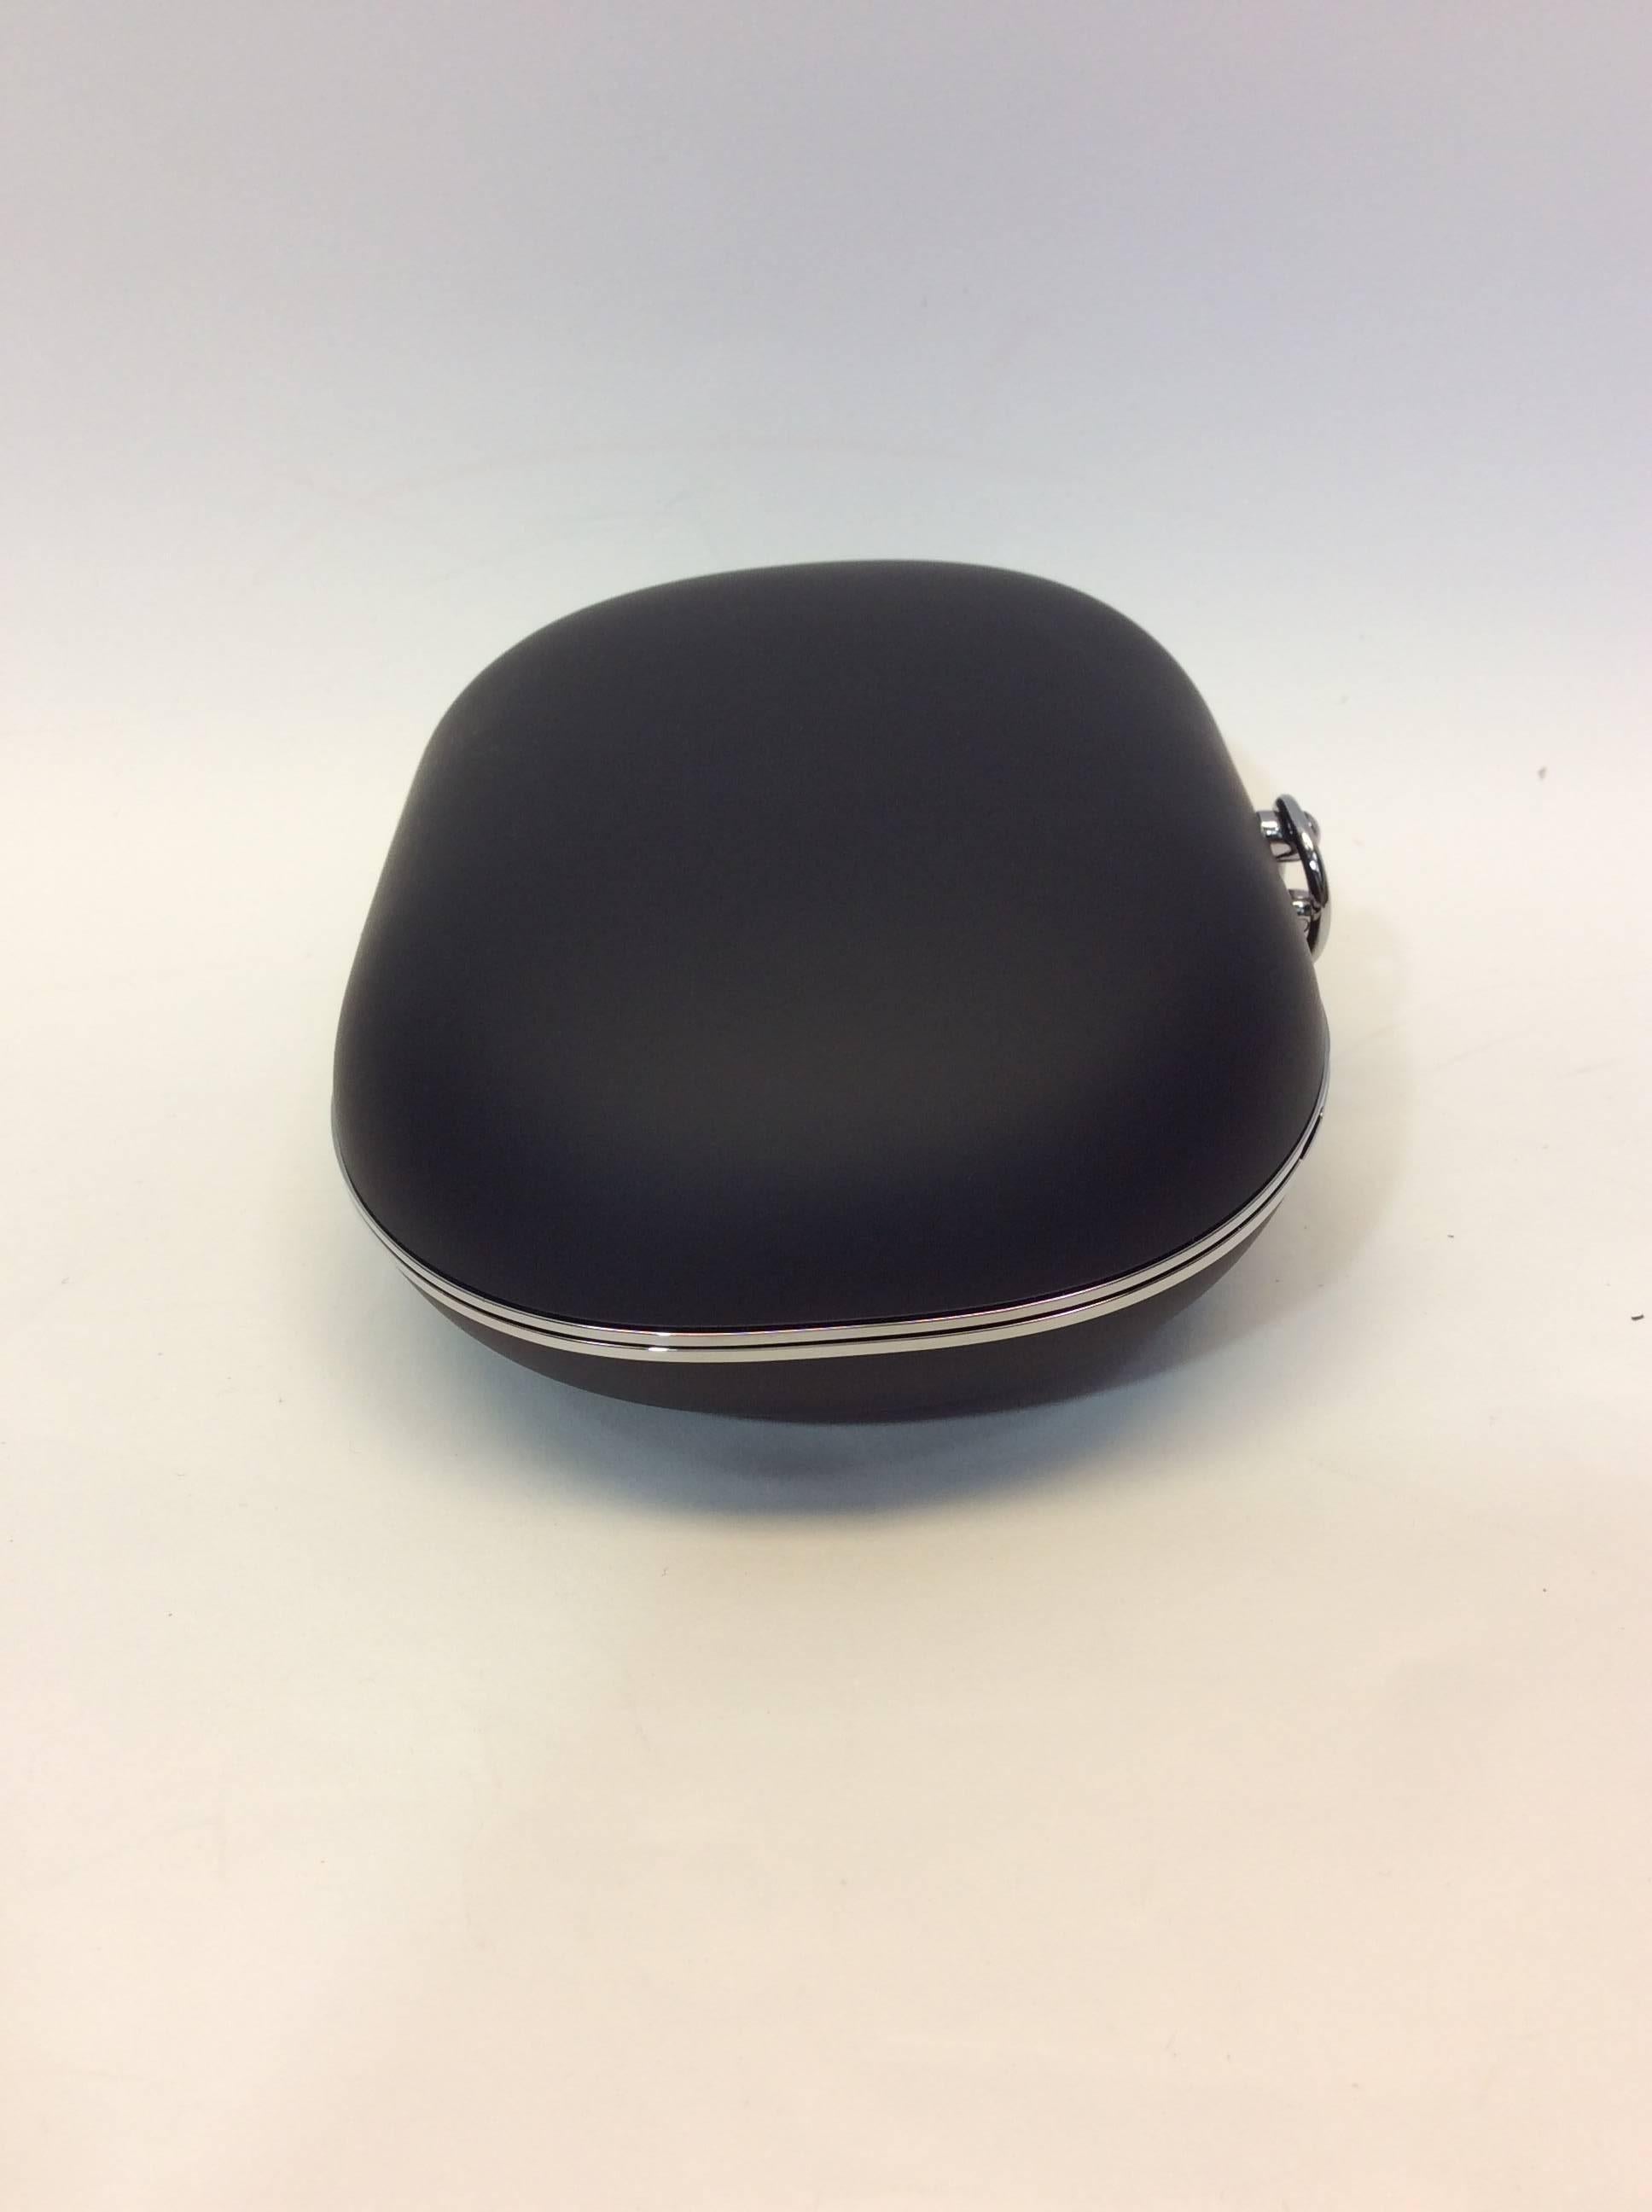 Jeffrey Levinson Black Egg Clutch In Excellent Condition For Sale In Narberth, PA